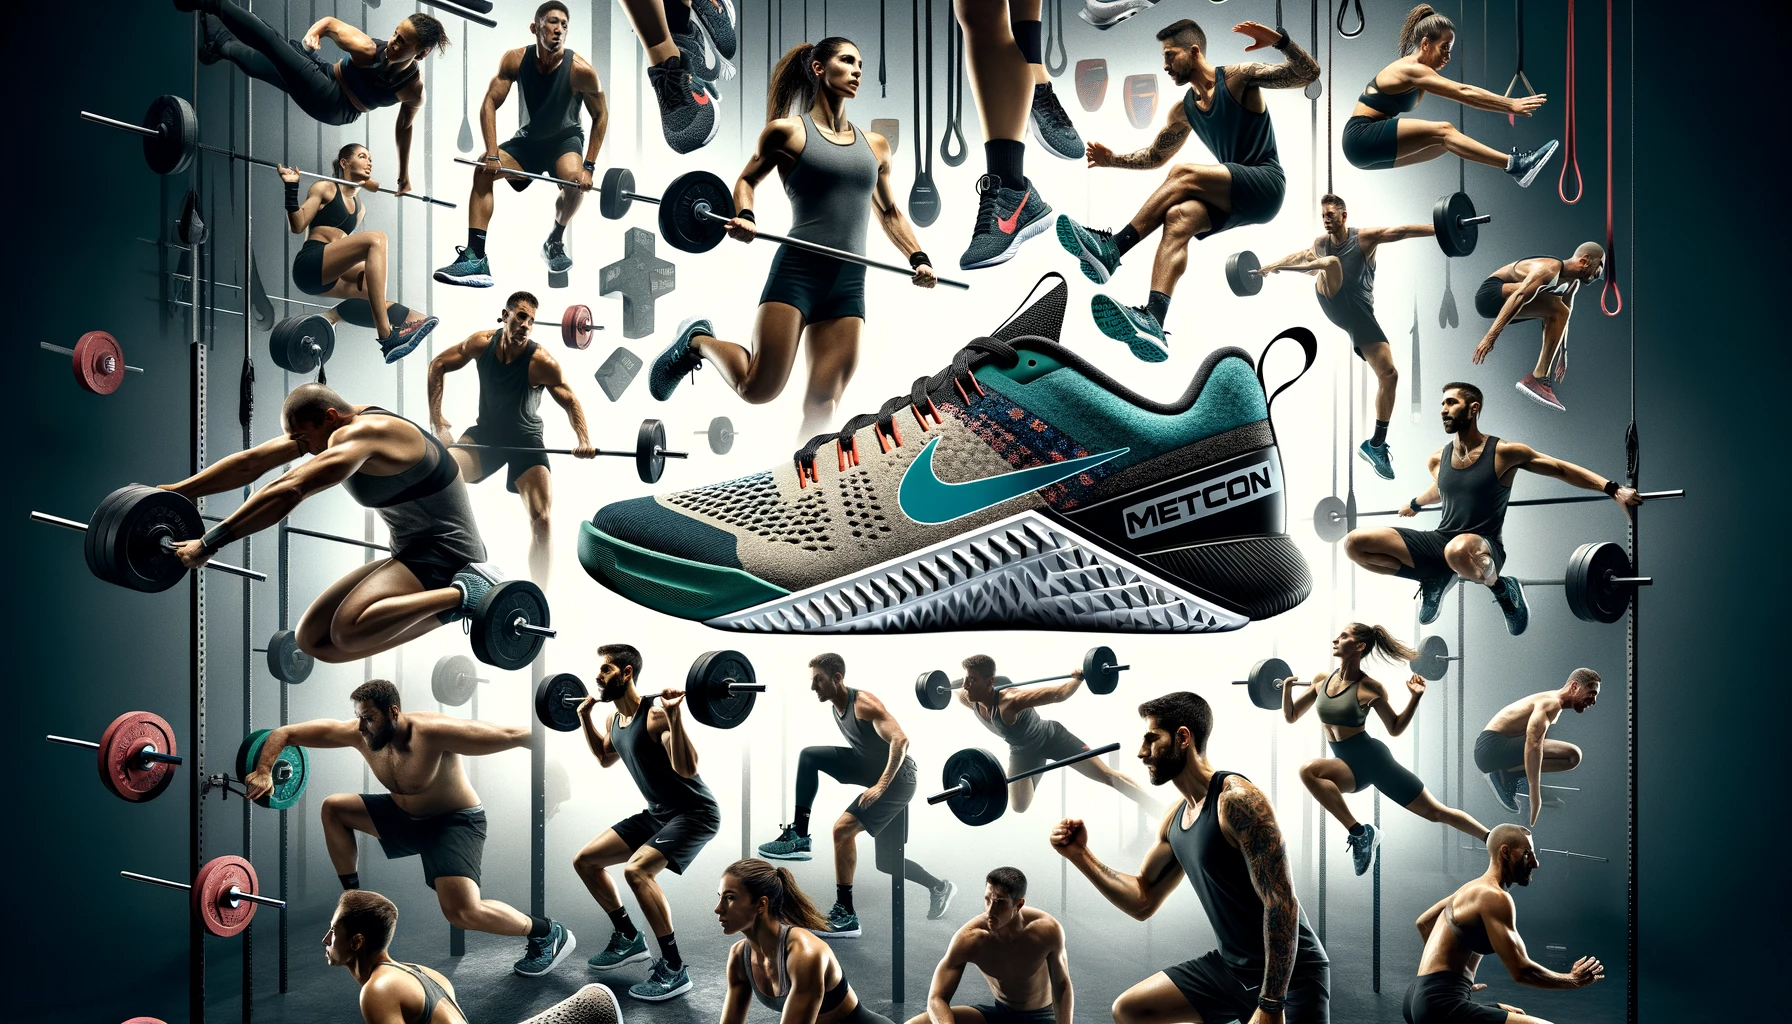 Nike Metcon Training Tips: Maximizing Performance with the Right Footwear